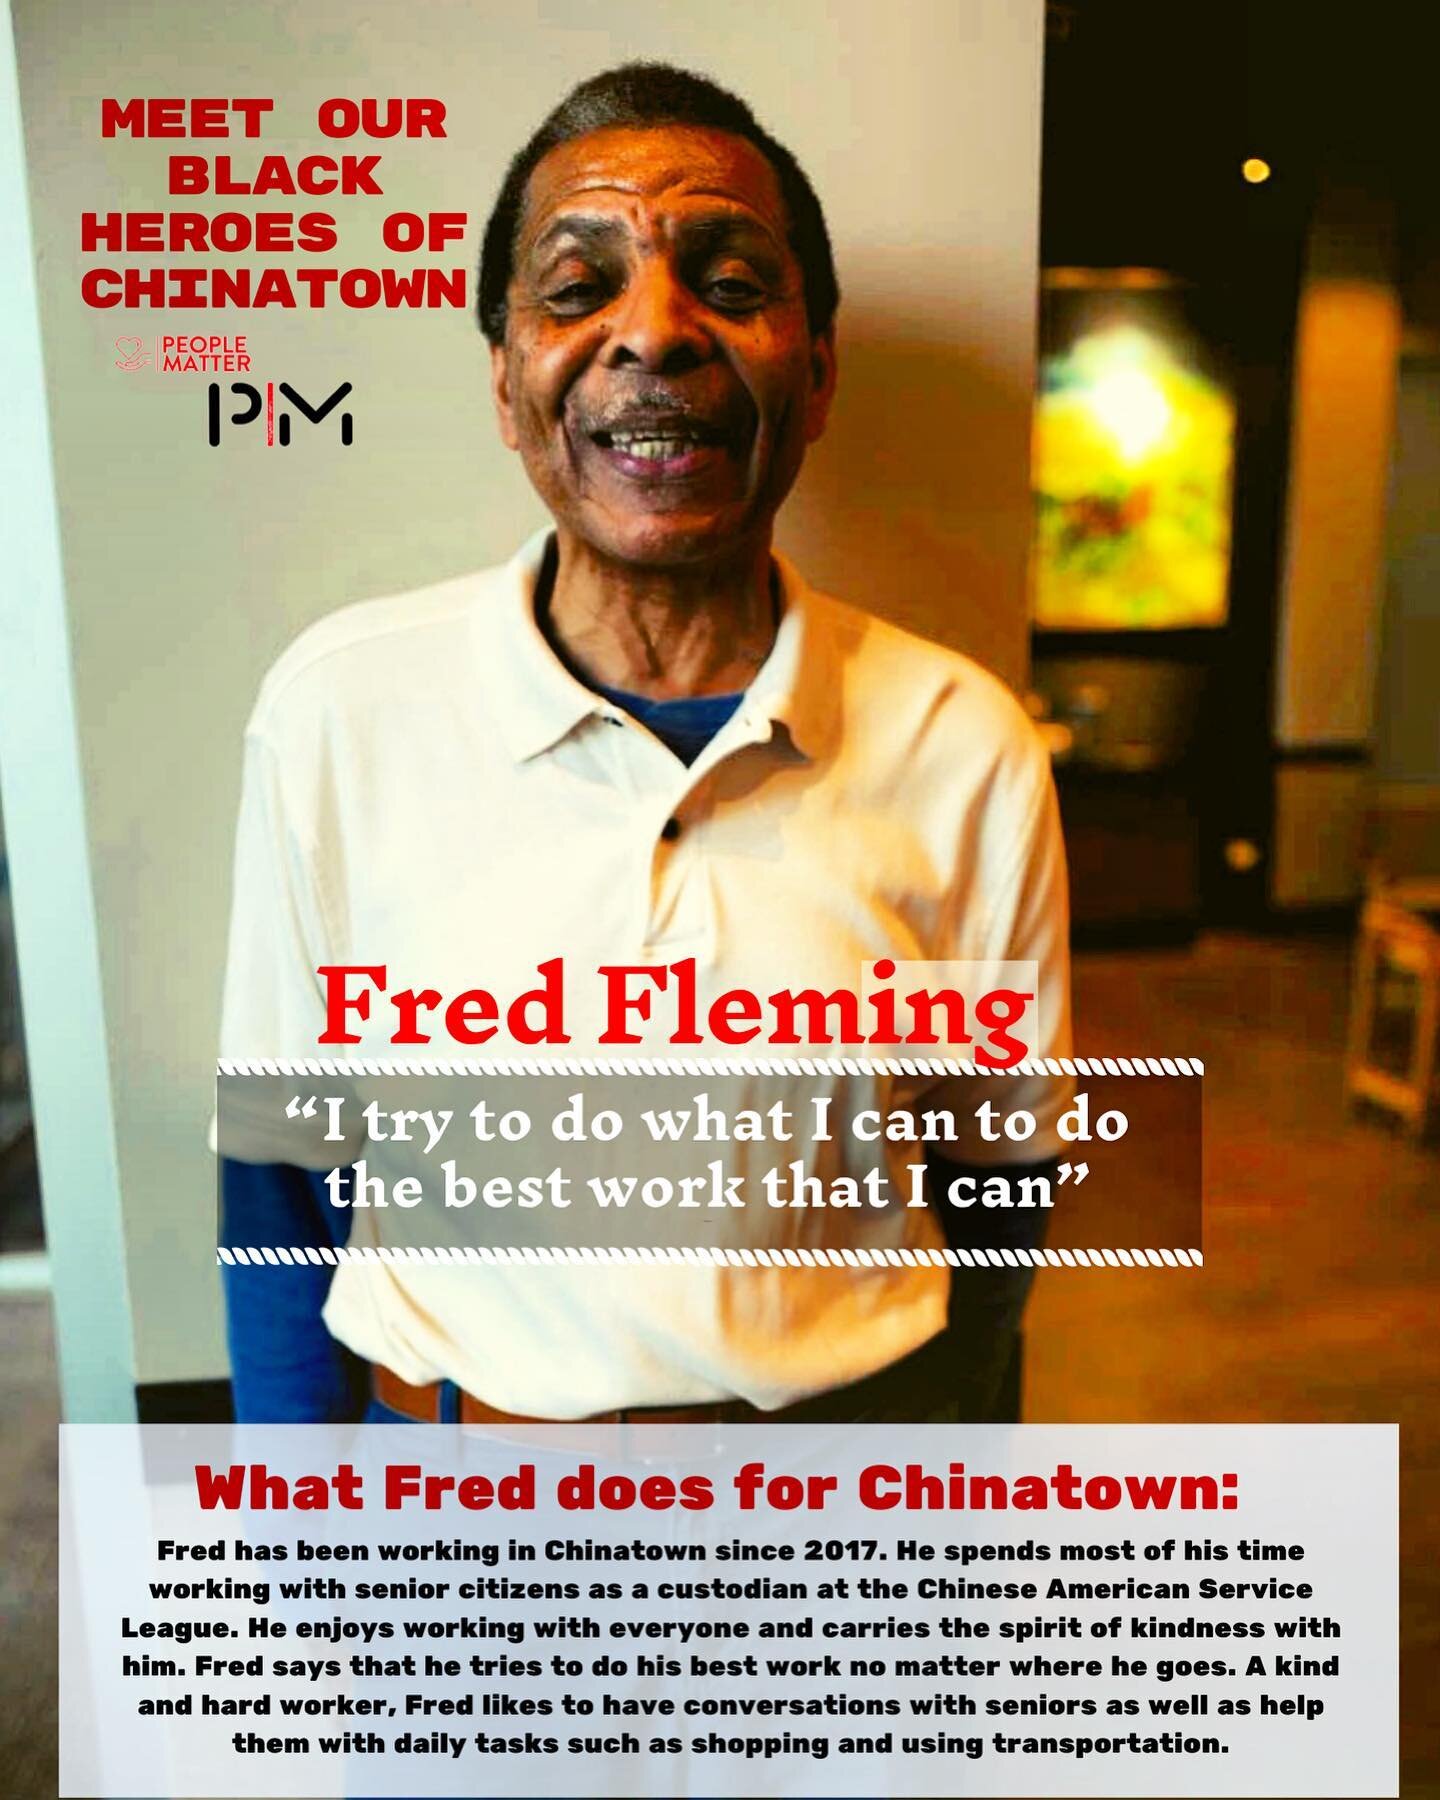 Nominate a Black hero! We've extended the deadline to January 22, 2021. Nominate a black hero of Chinatown at the link:
https://tinyurl.com/nominateablackhero

We are coming back with our annual Celebration of Black Heroes of Chinatown in 2021! Every